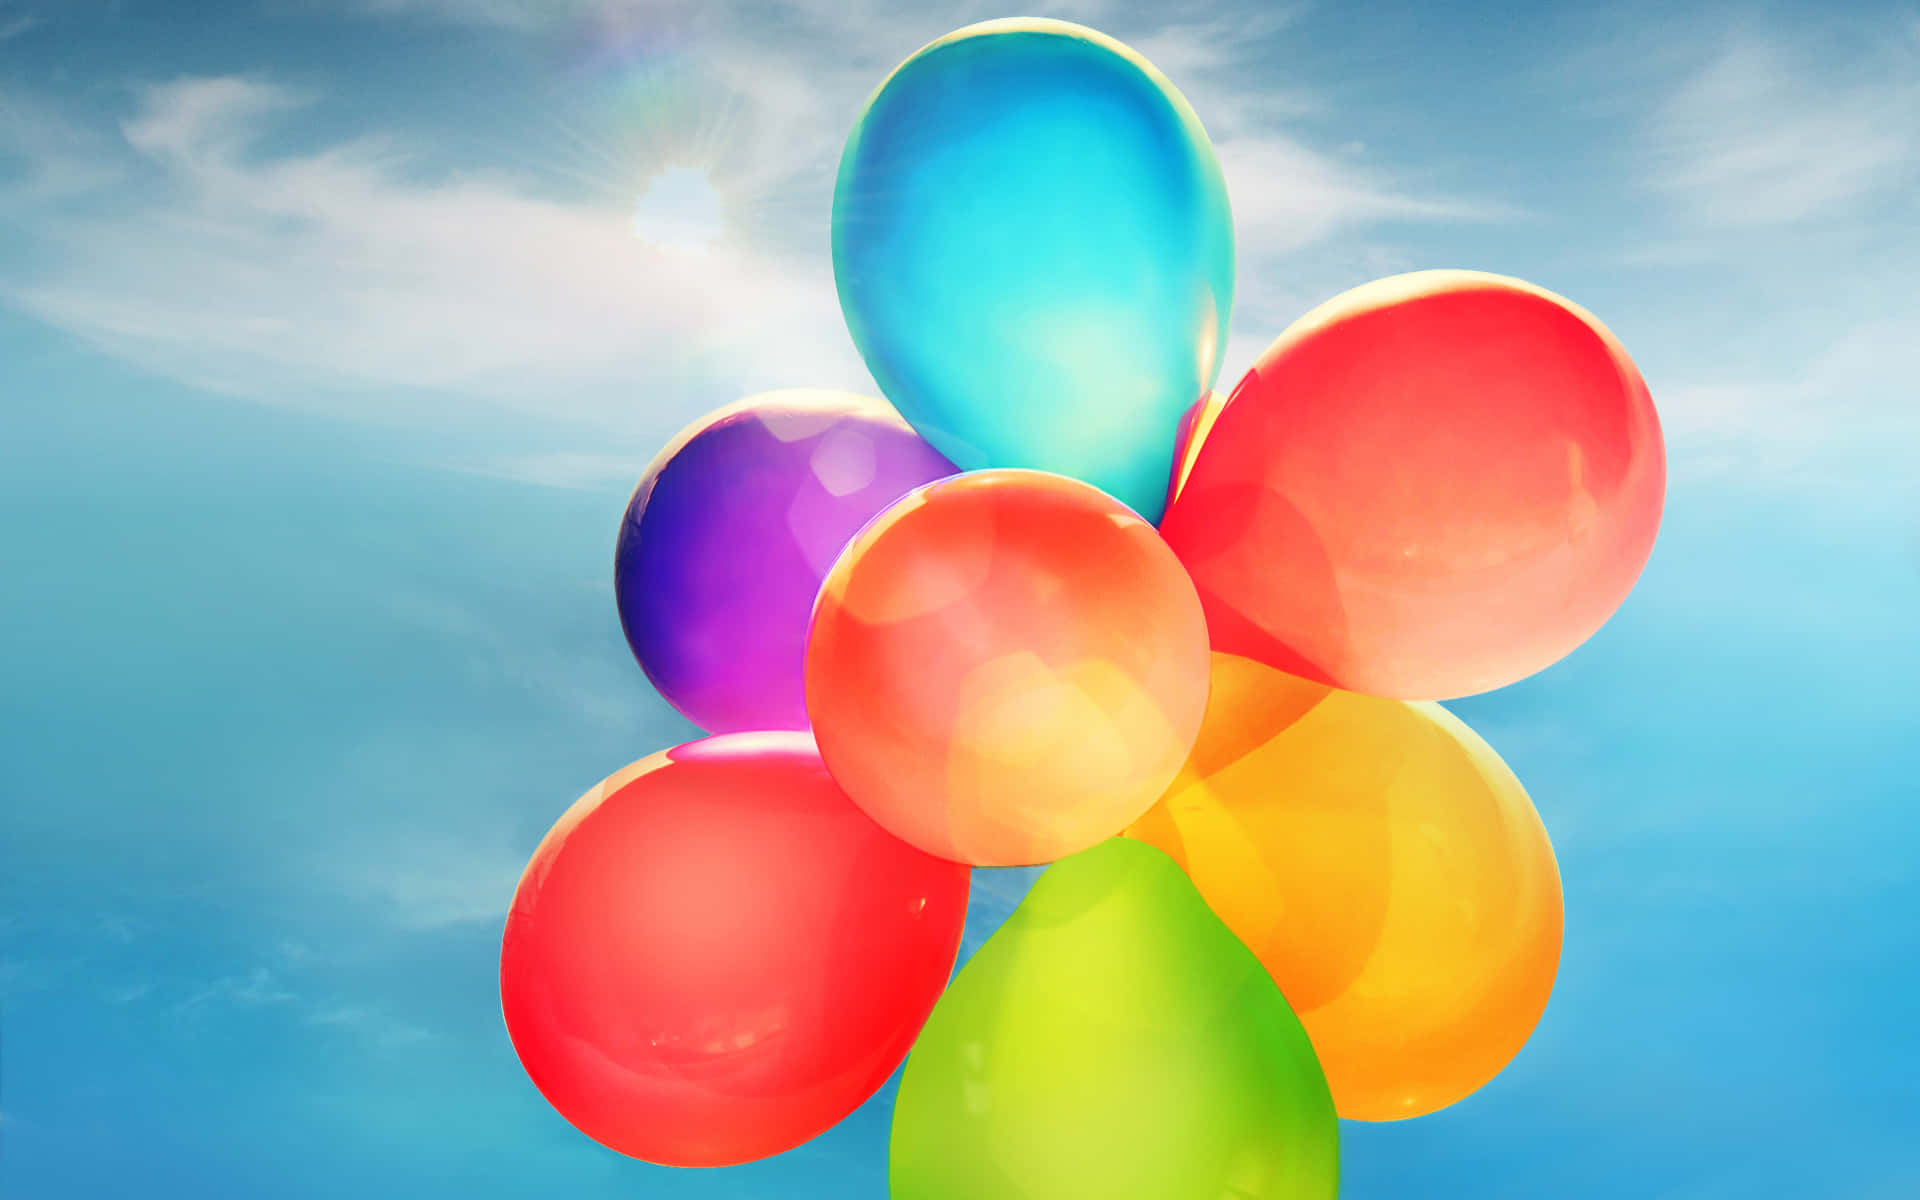 Balloons Background Balloons Stringed Up Together